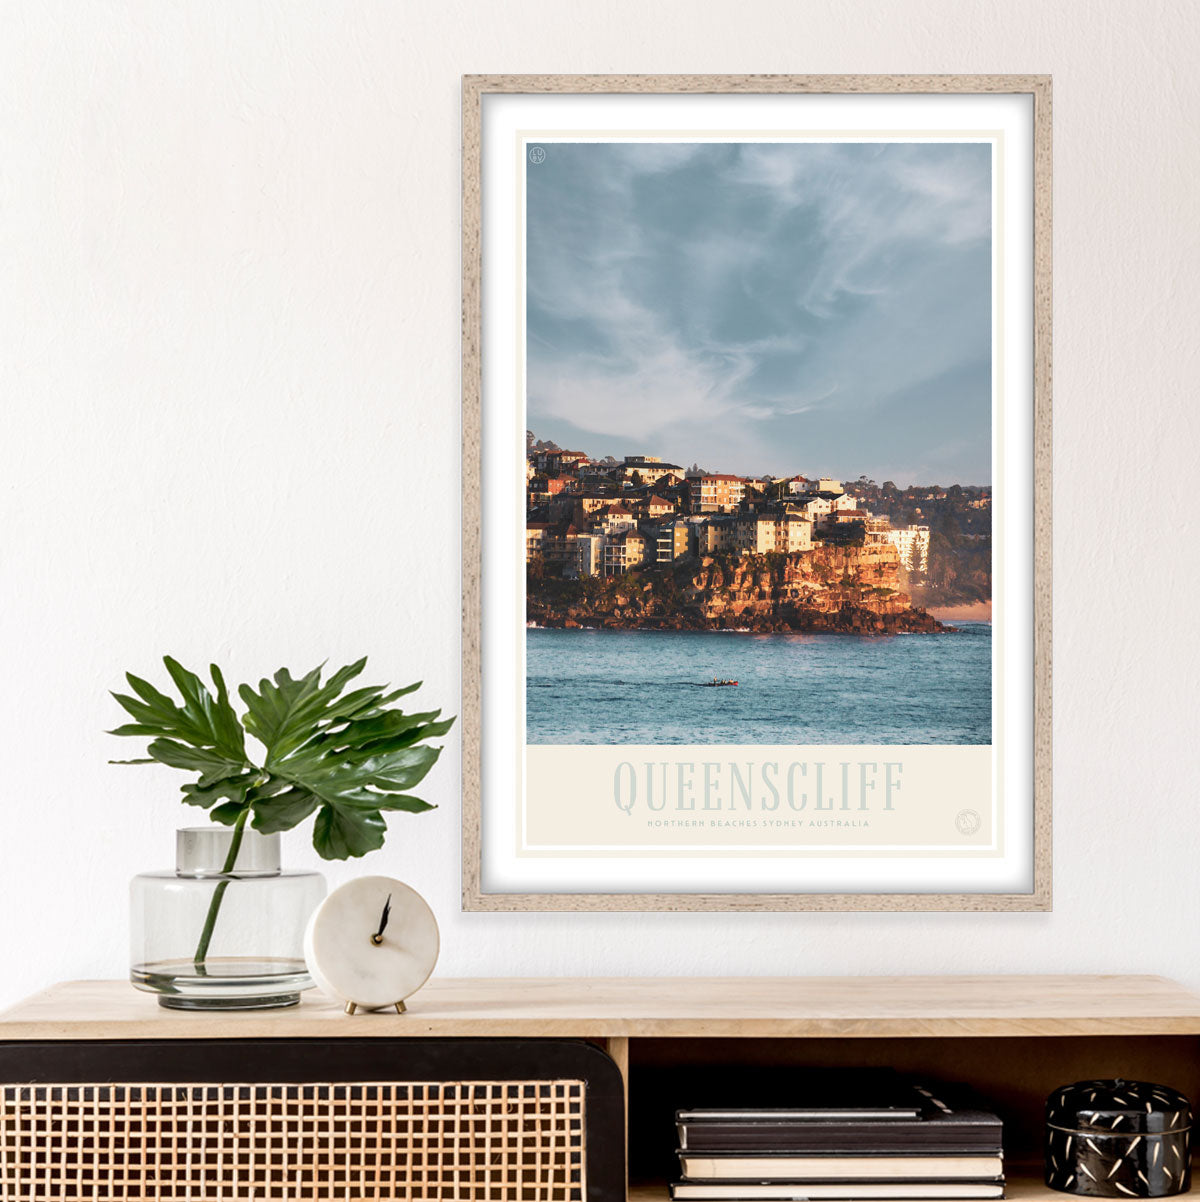 Queenslcliff Manly vintage retro poster print from Places We Luv